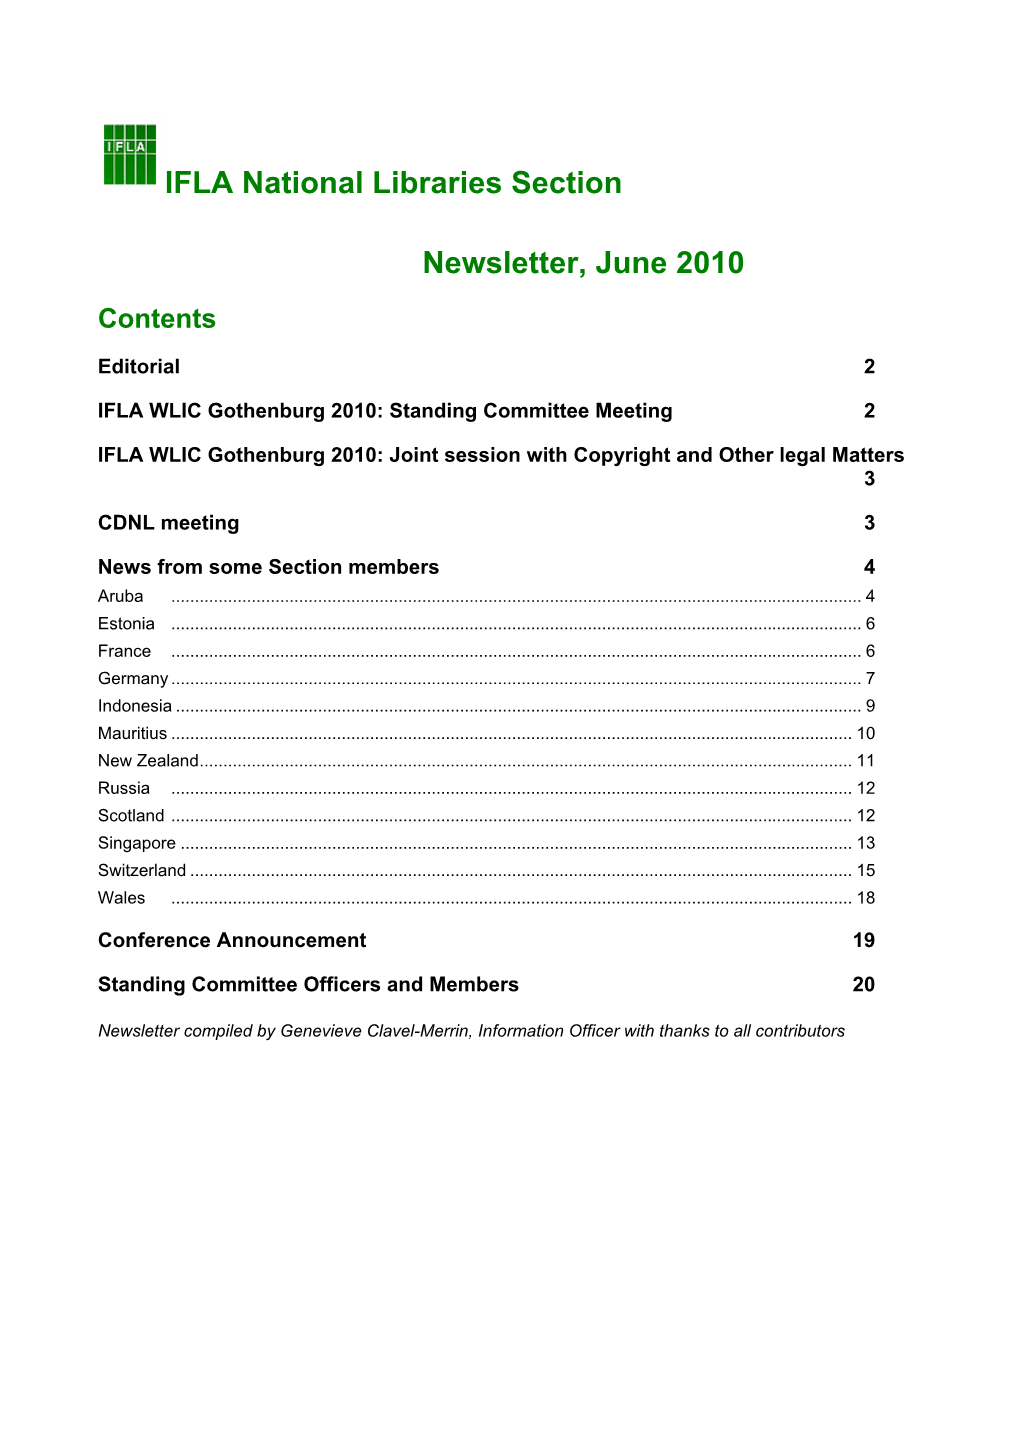 IFLA National Libraries Section Newsletter, June 2010